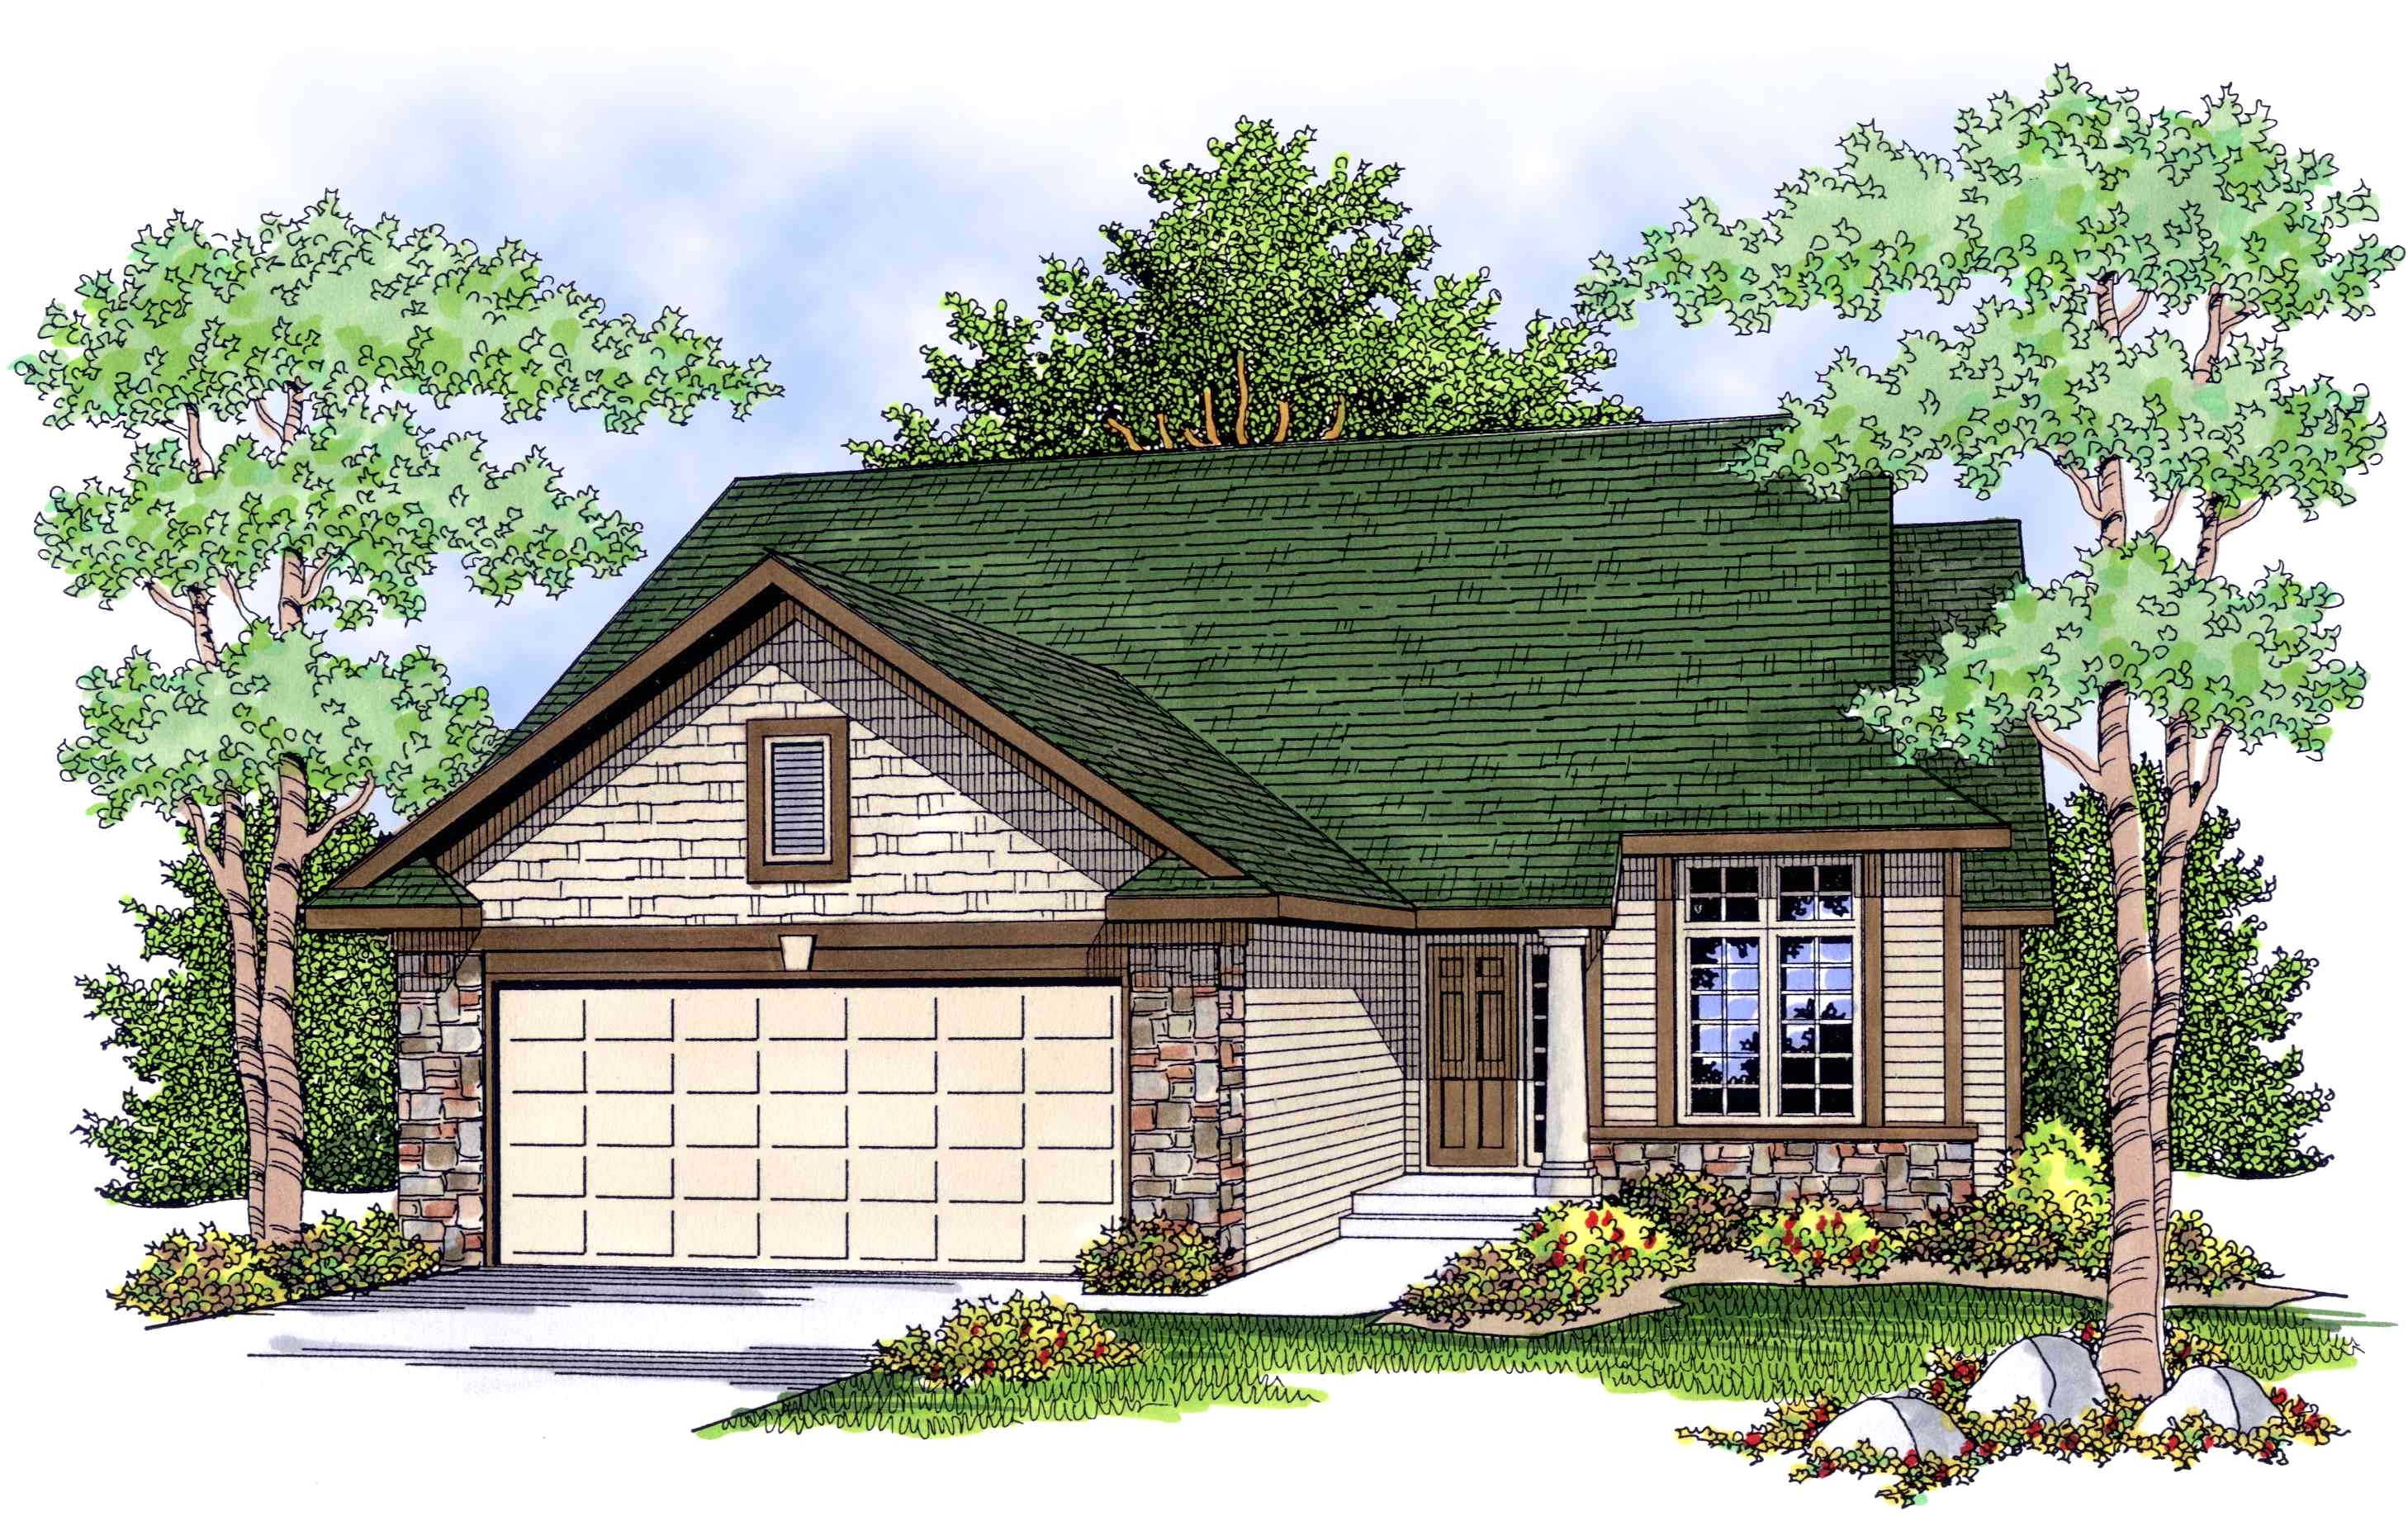 Ranch Home Plans with Cost to Build Economical and Easy to Build Ranch House Plan 89007ah